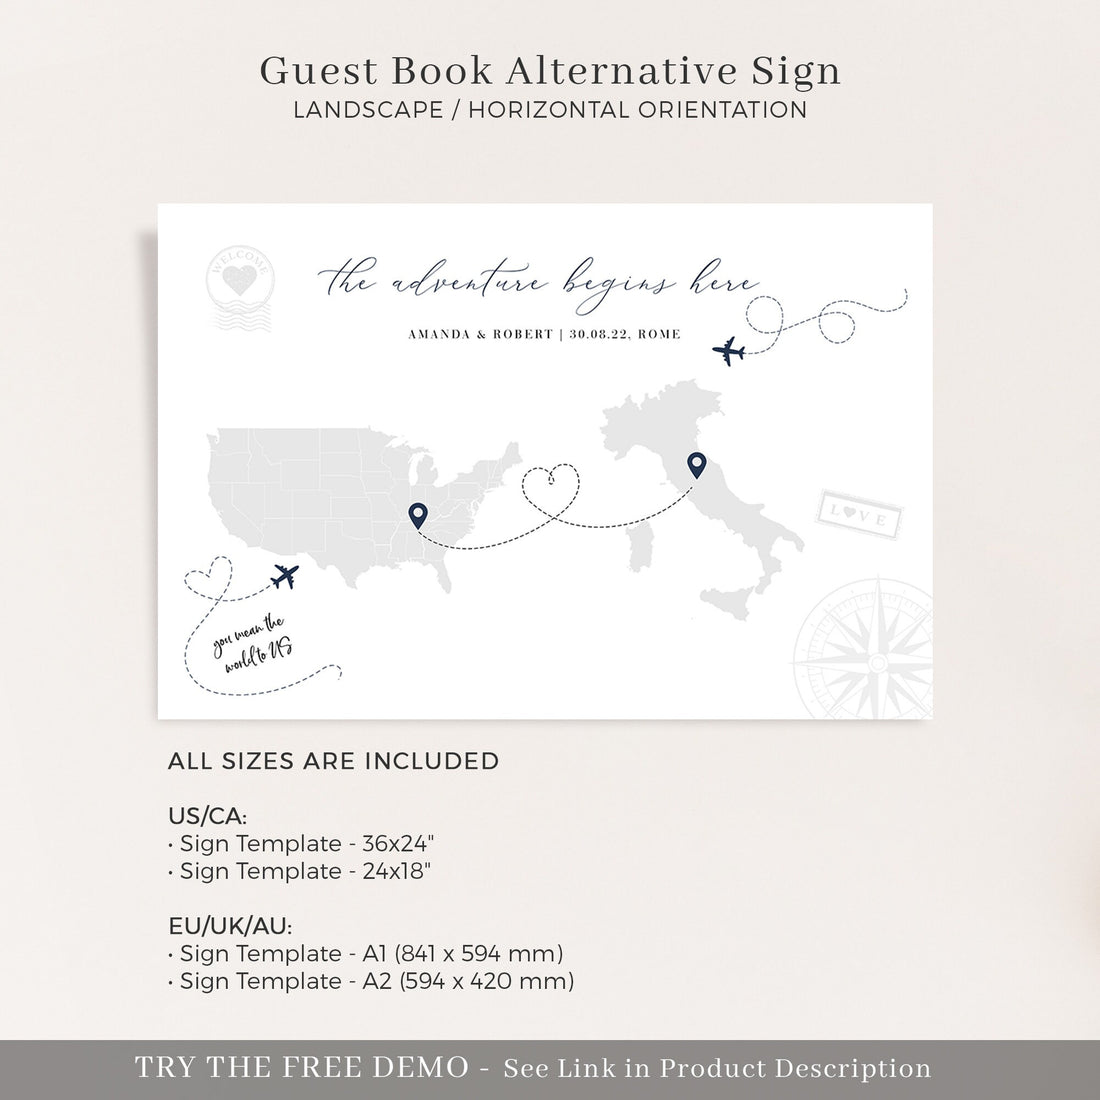 SOFIA Travel Wedding Guest Book Sign Template